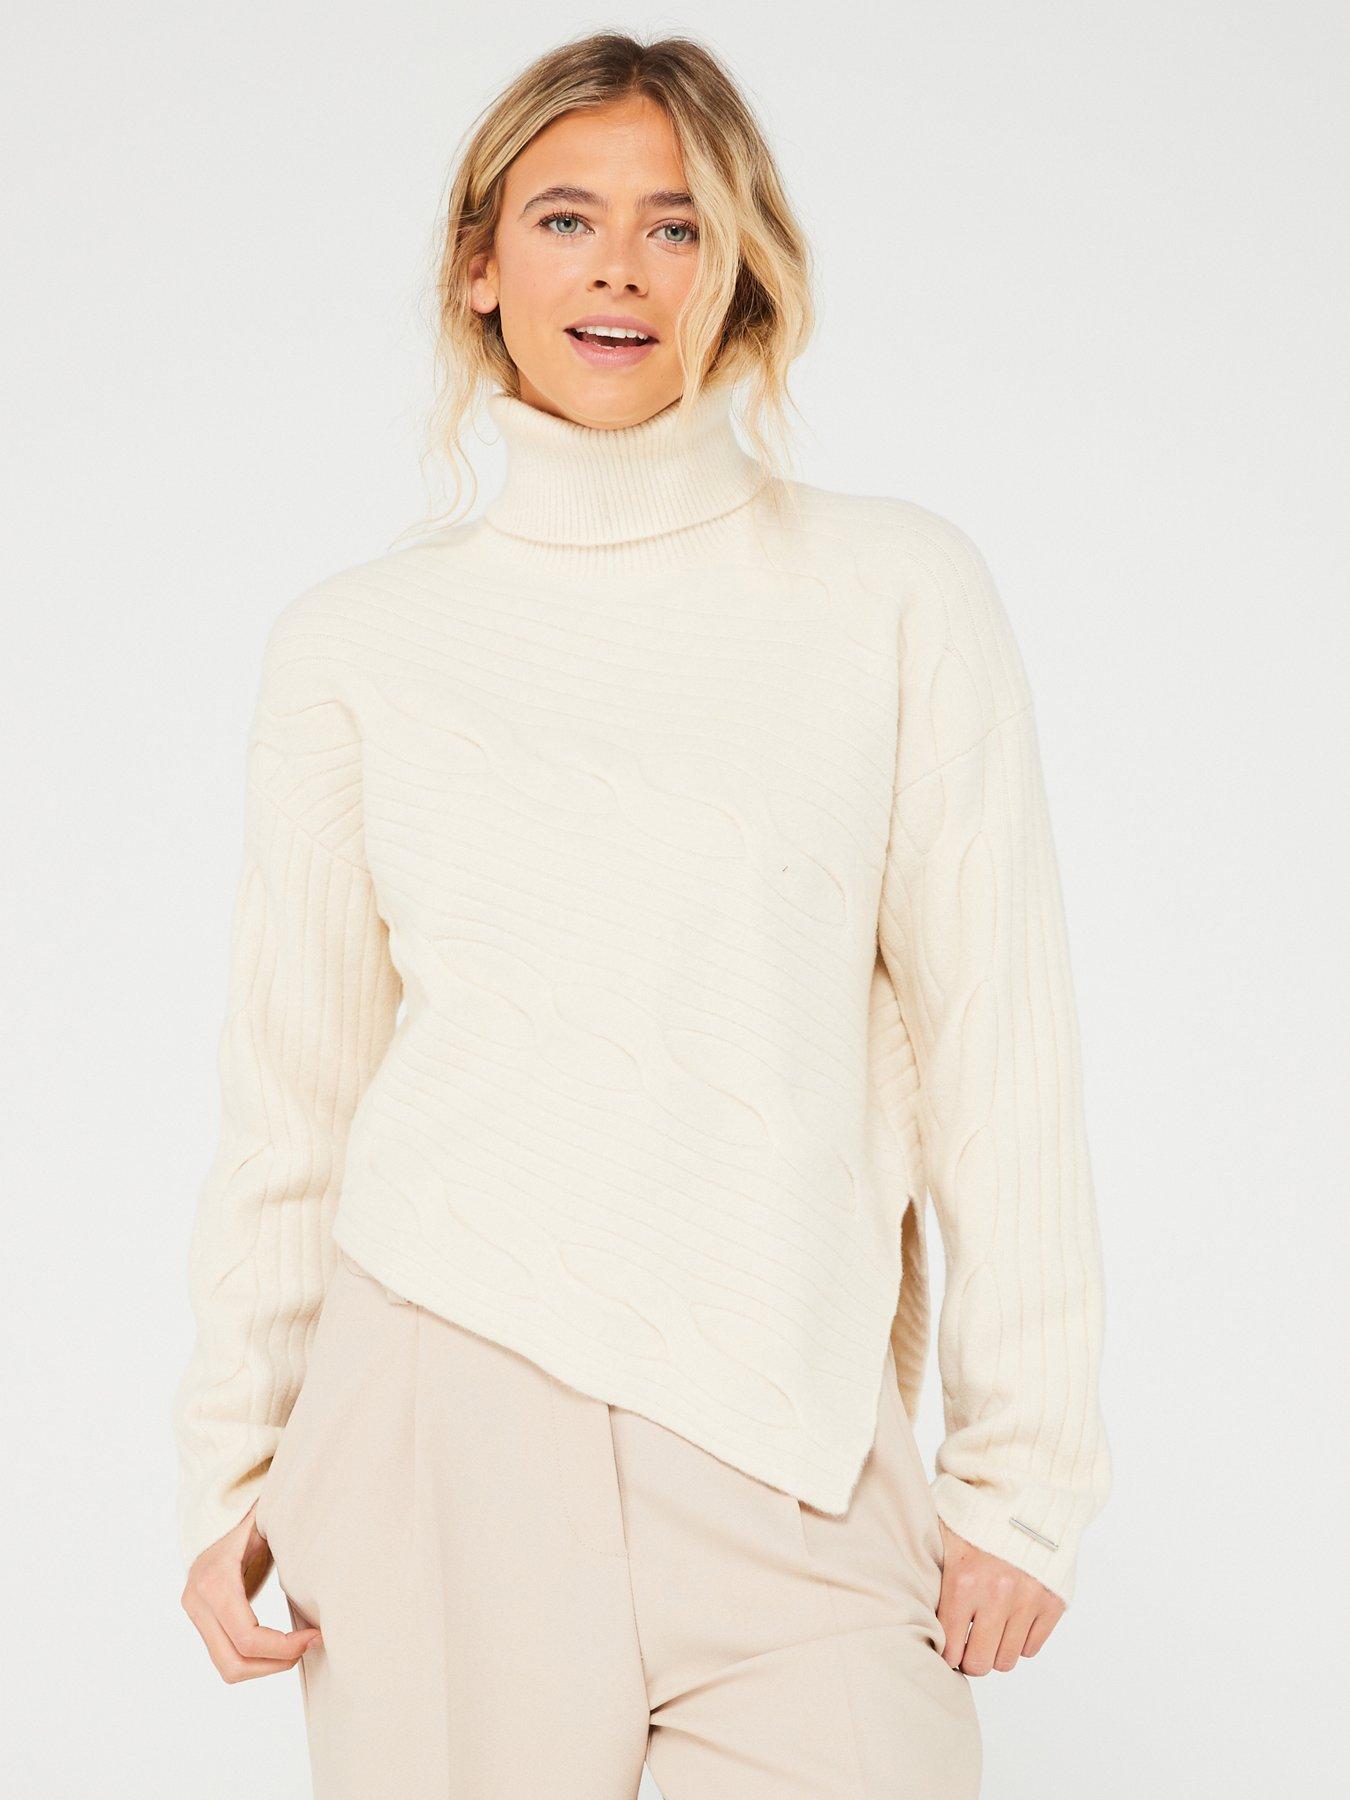 $129 Womens DKNY Luxurious Cashmere Blend Ribbed Sweater Knit